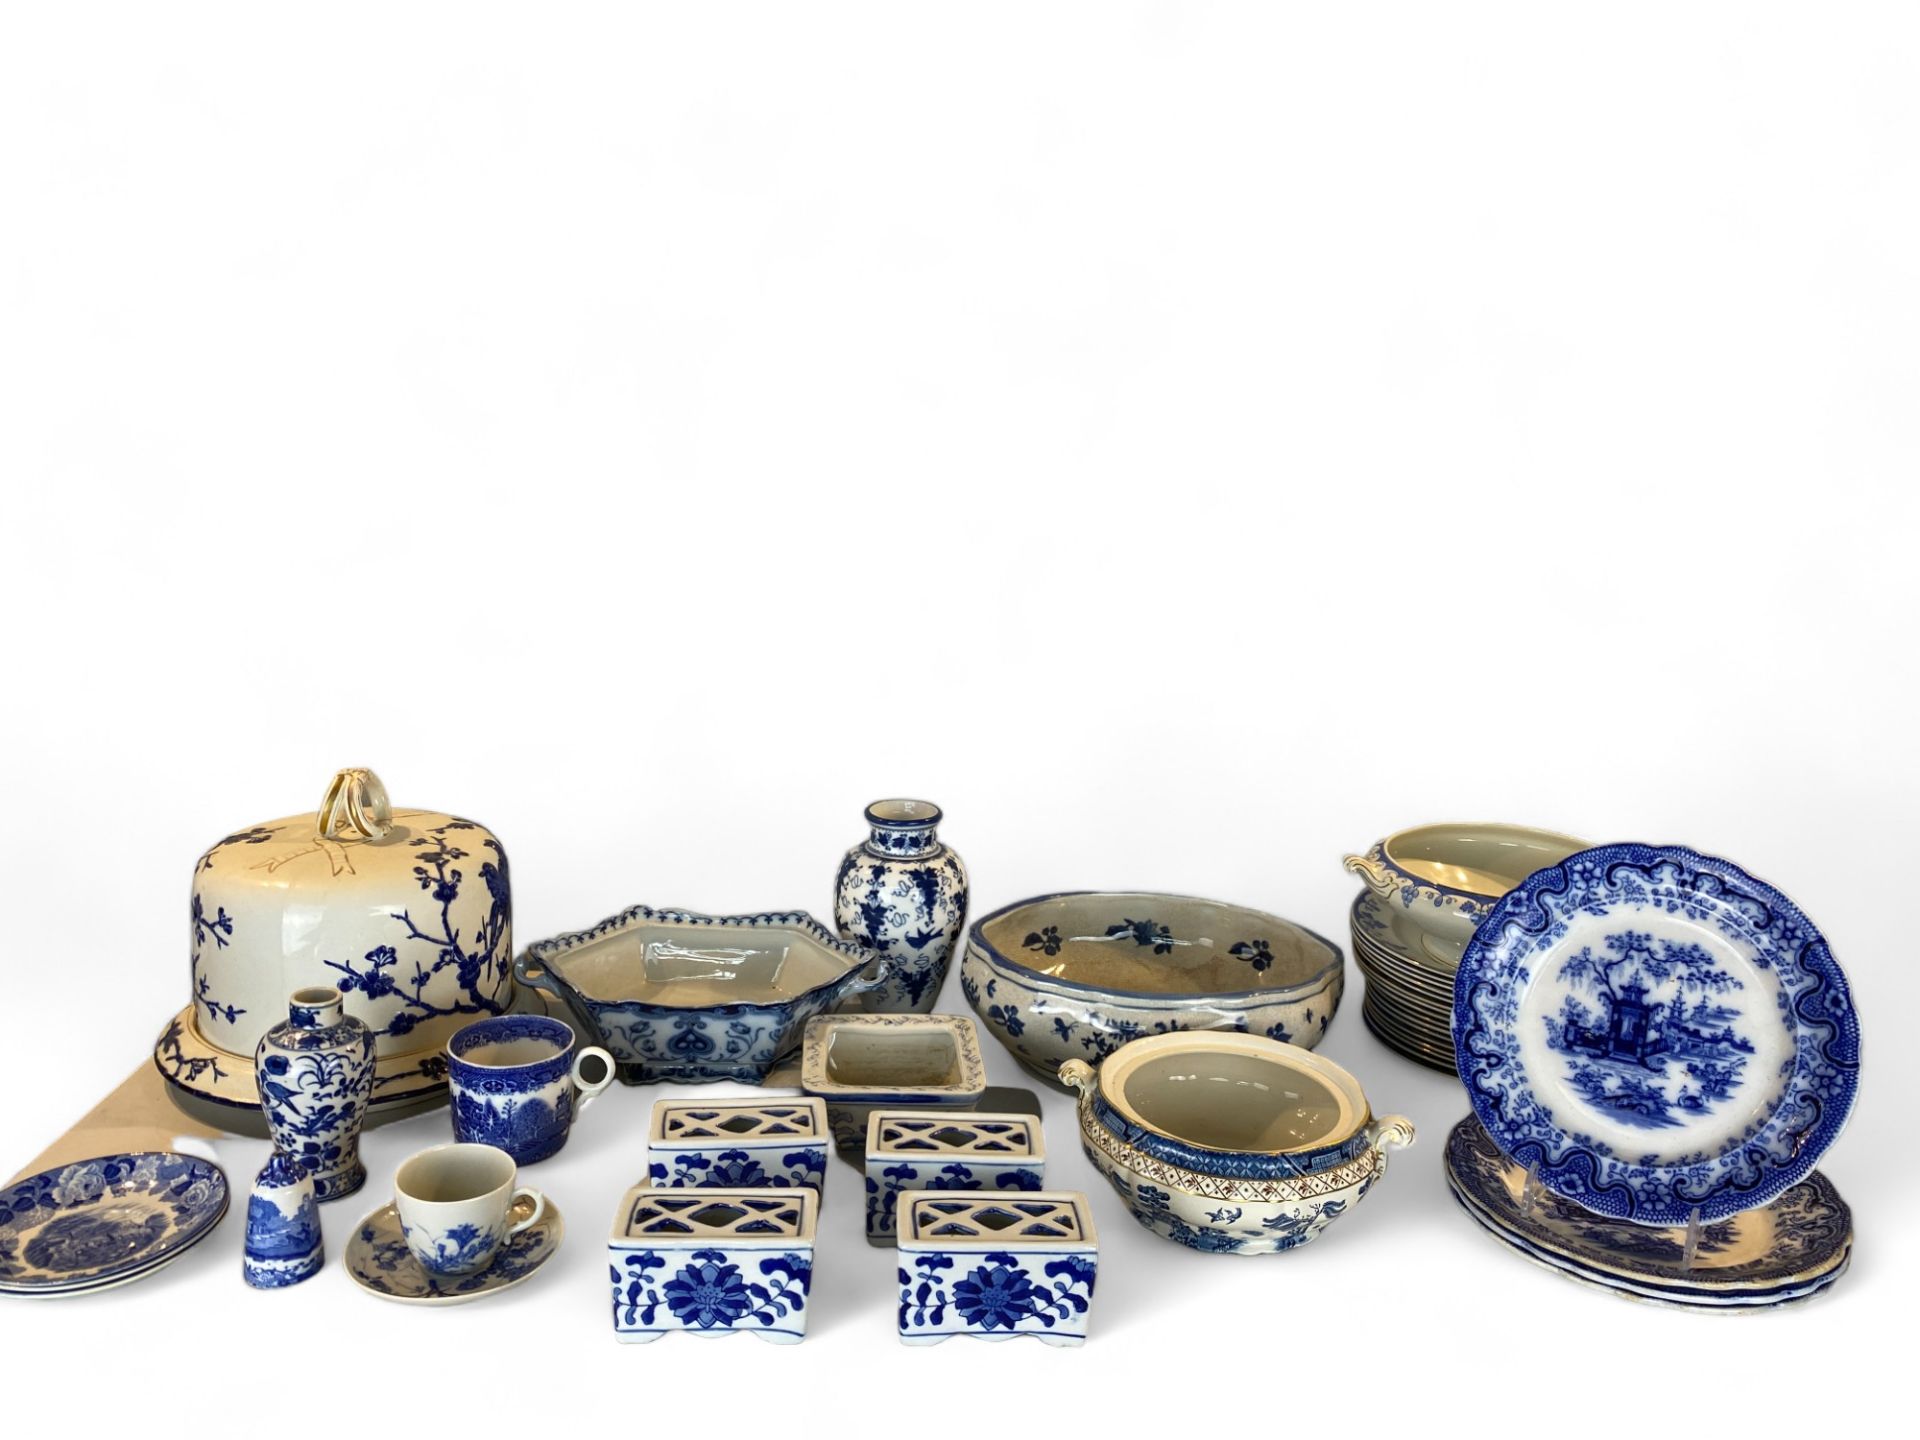 A collection of mostly English 19th century and later blue and white pottery and porcelain